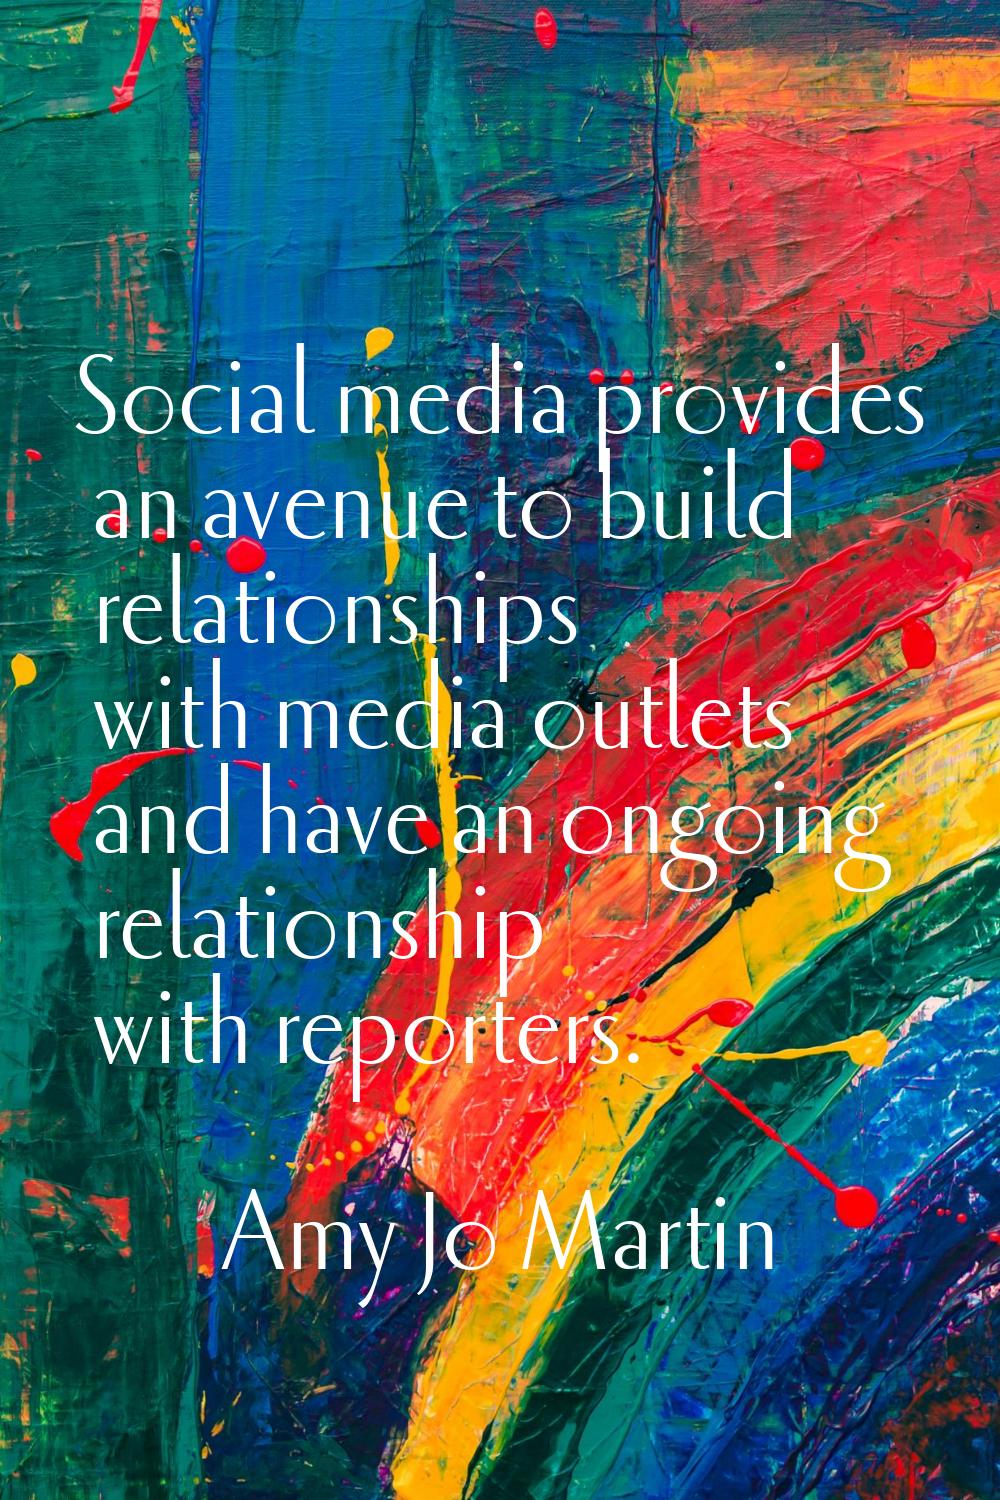 Social media provides an avenue to build relationships with media outlets and have an ongoing relat